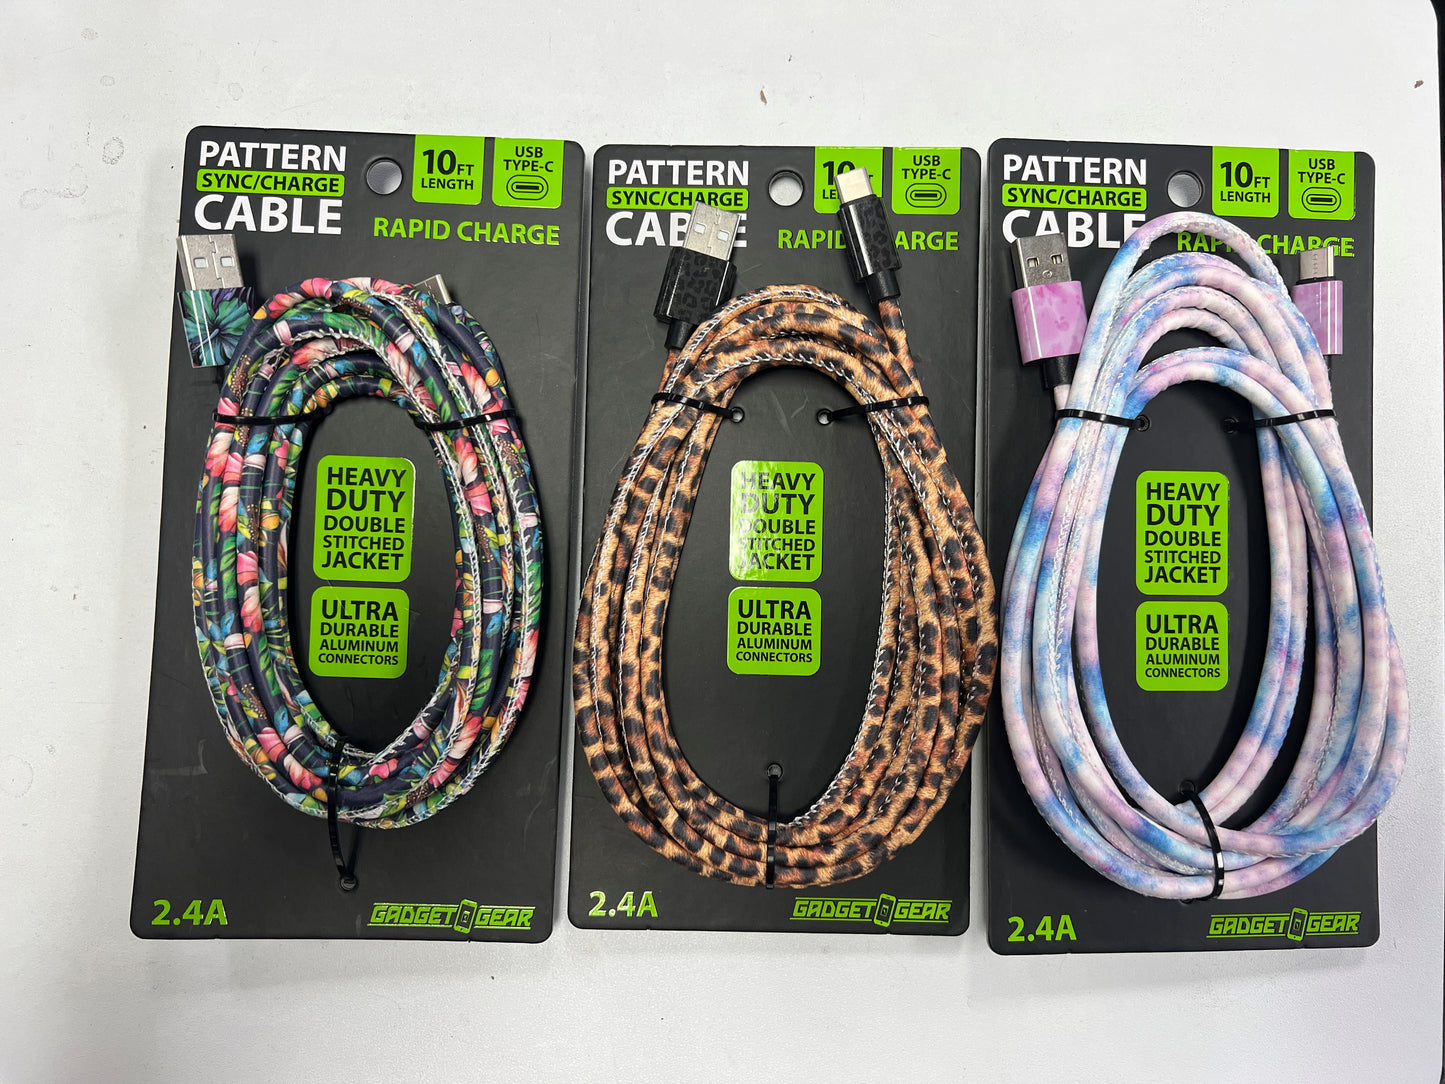 ITEM NUMBER 022653L 10FT PRINTED CABLE TYPE C  - STORE SURPLUS NO DISPLAY 6 PIECES PER PACK